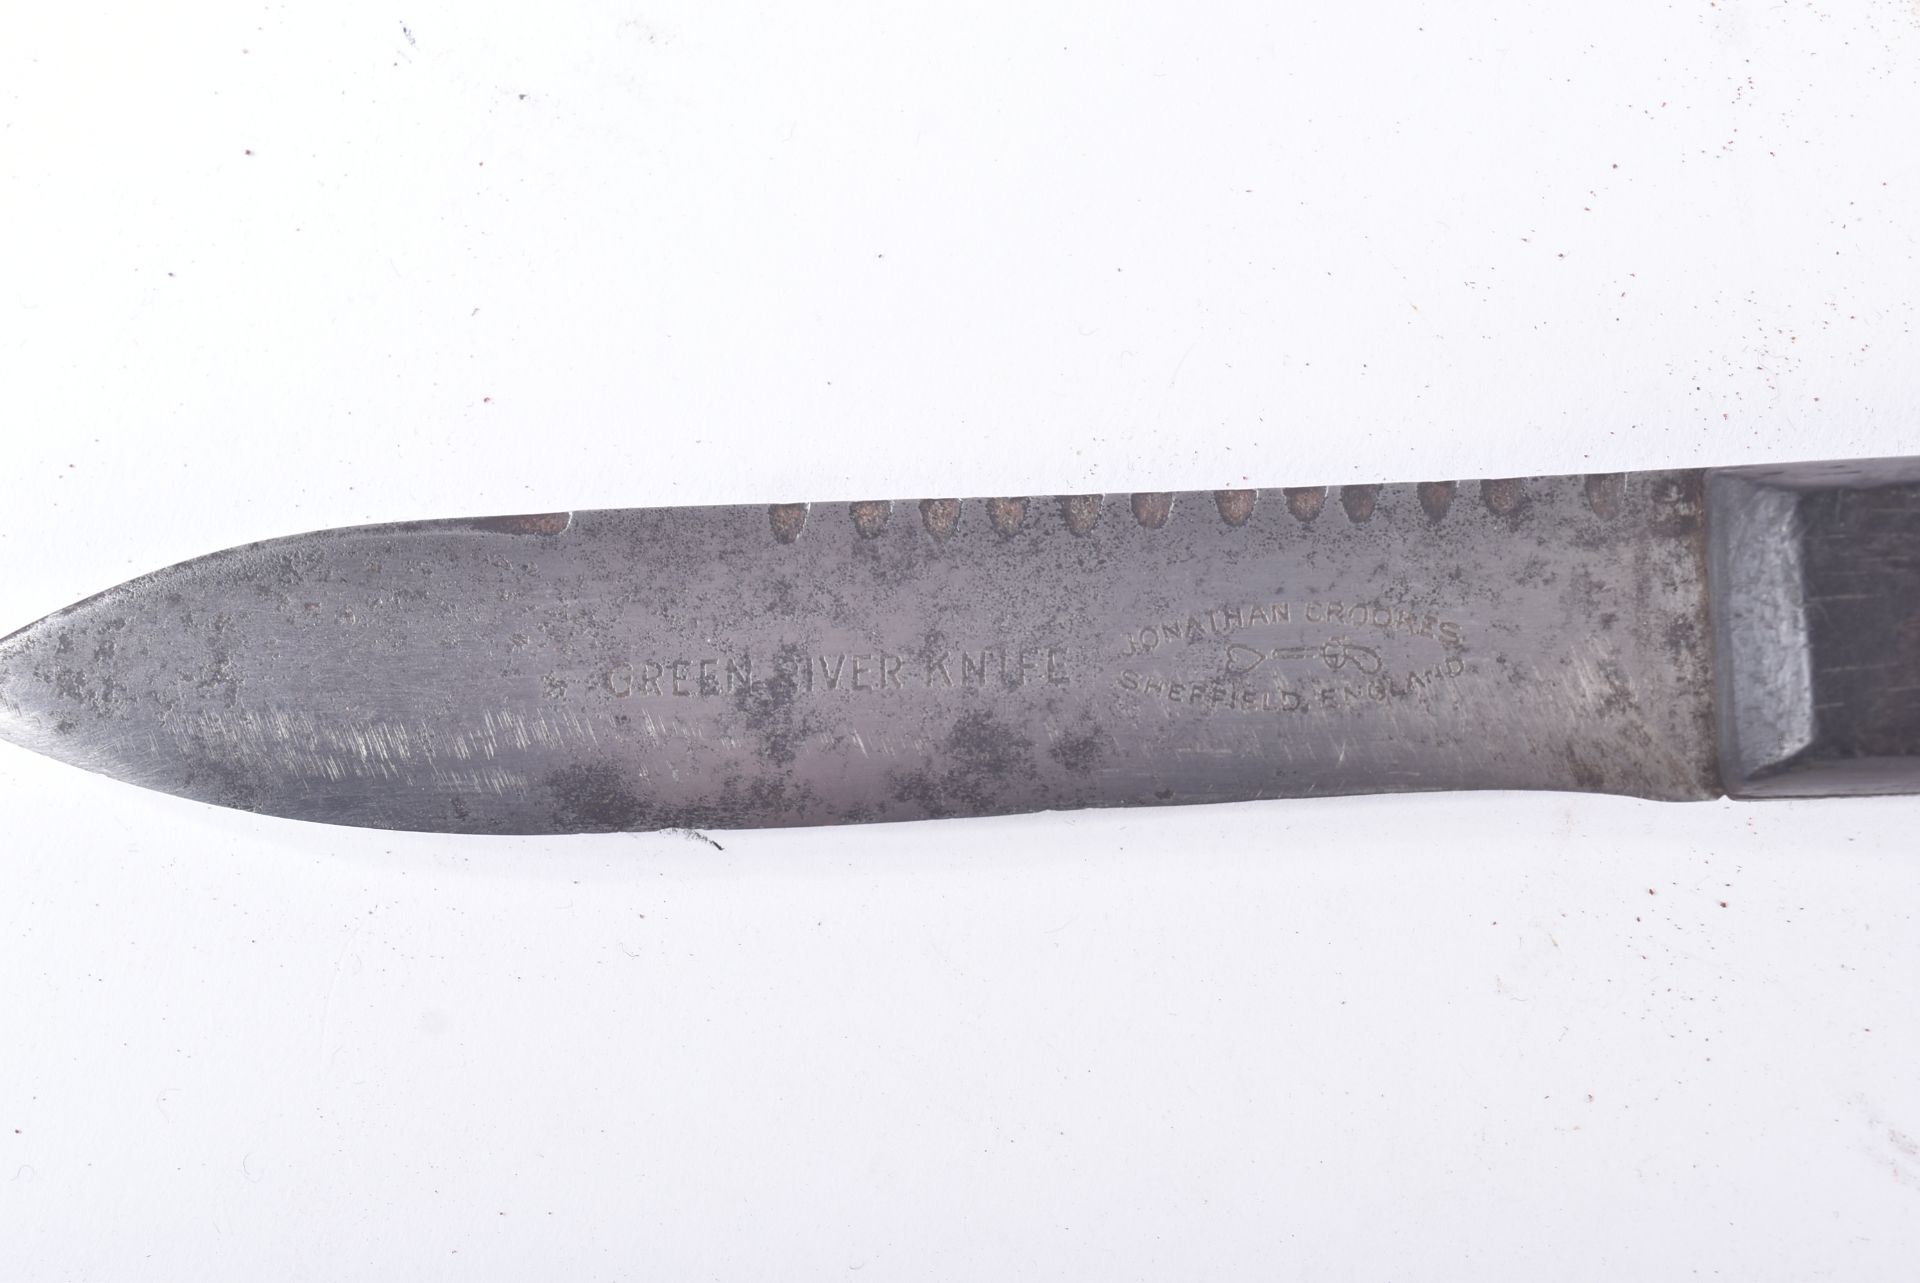 19TH CENTURY AMERICAN CIVIL WAR PERIOD GREEN RIVER KNIFE - Image 2 of 5